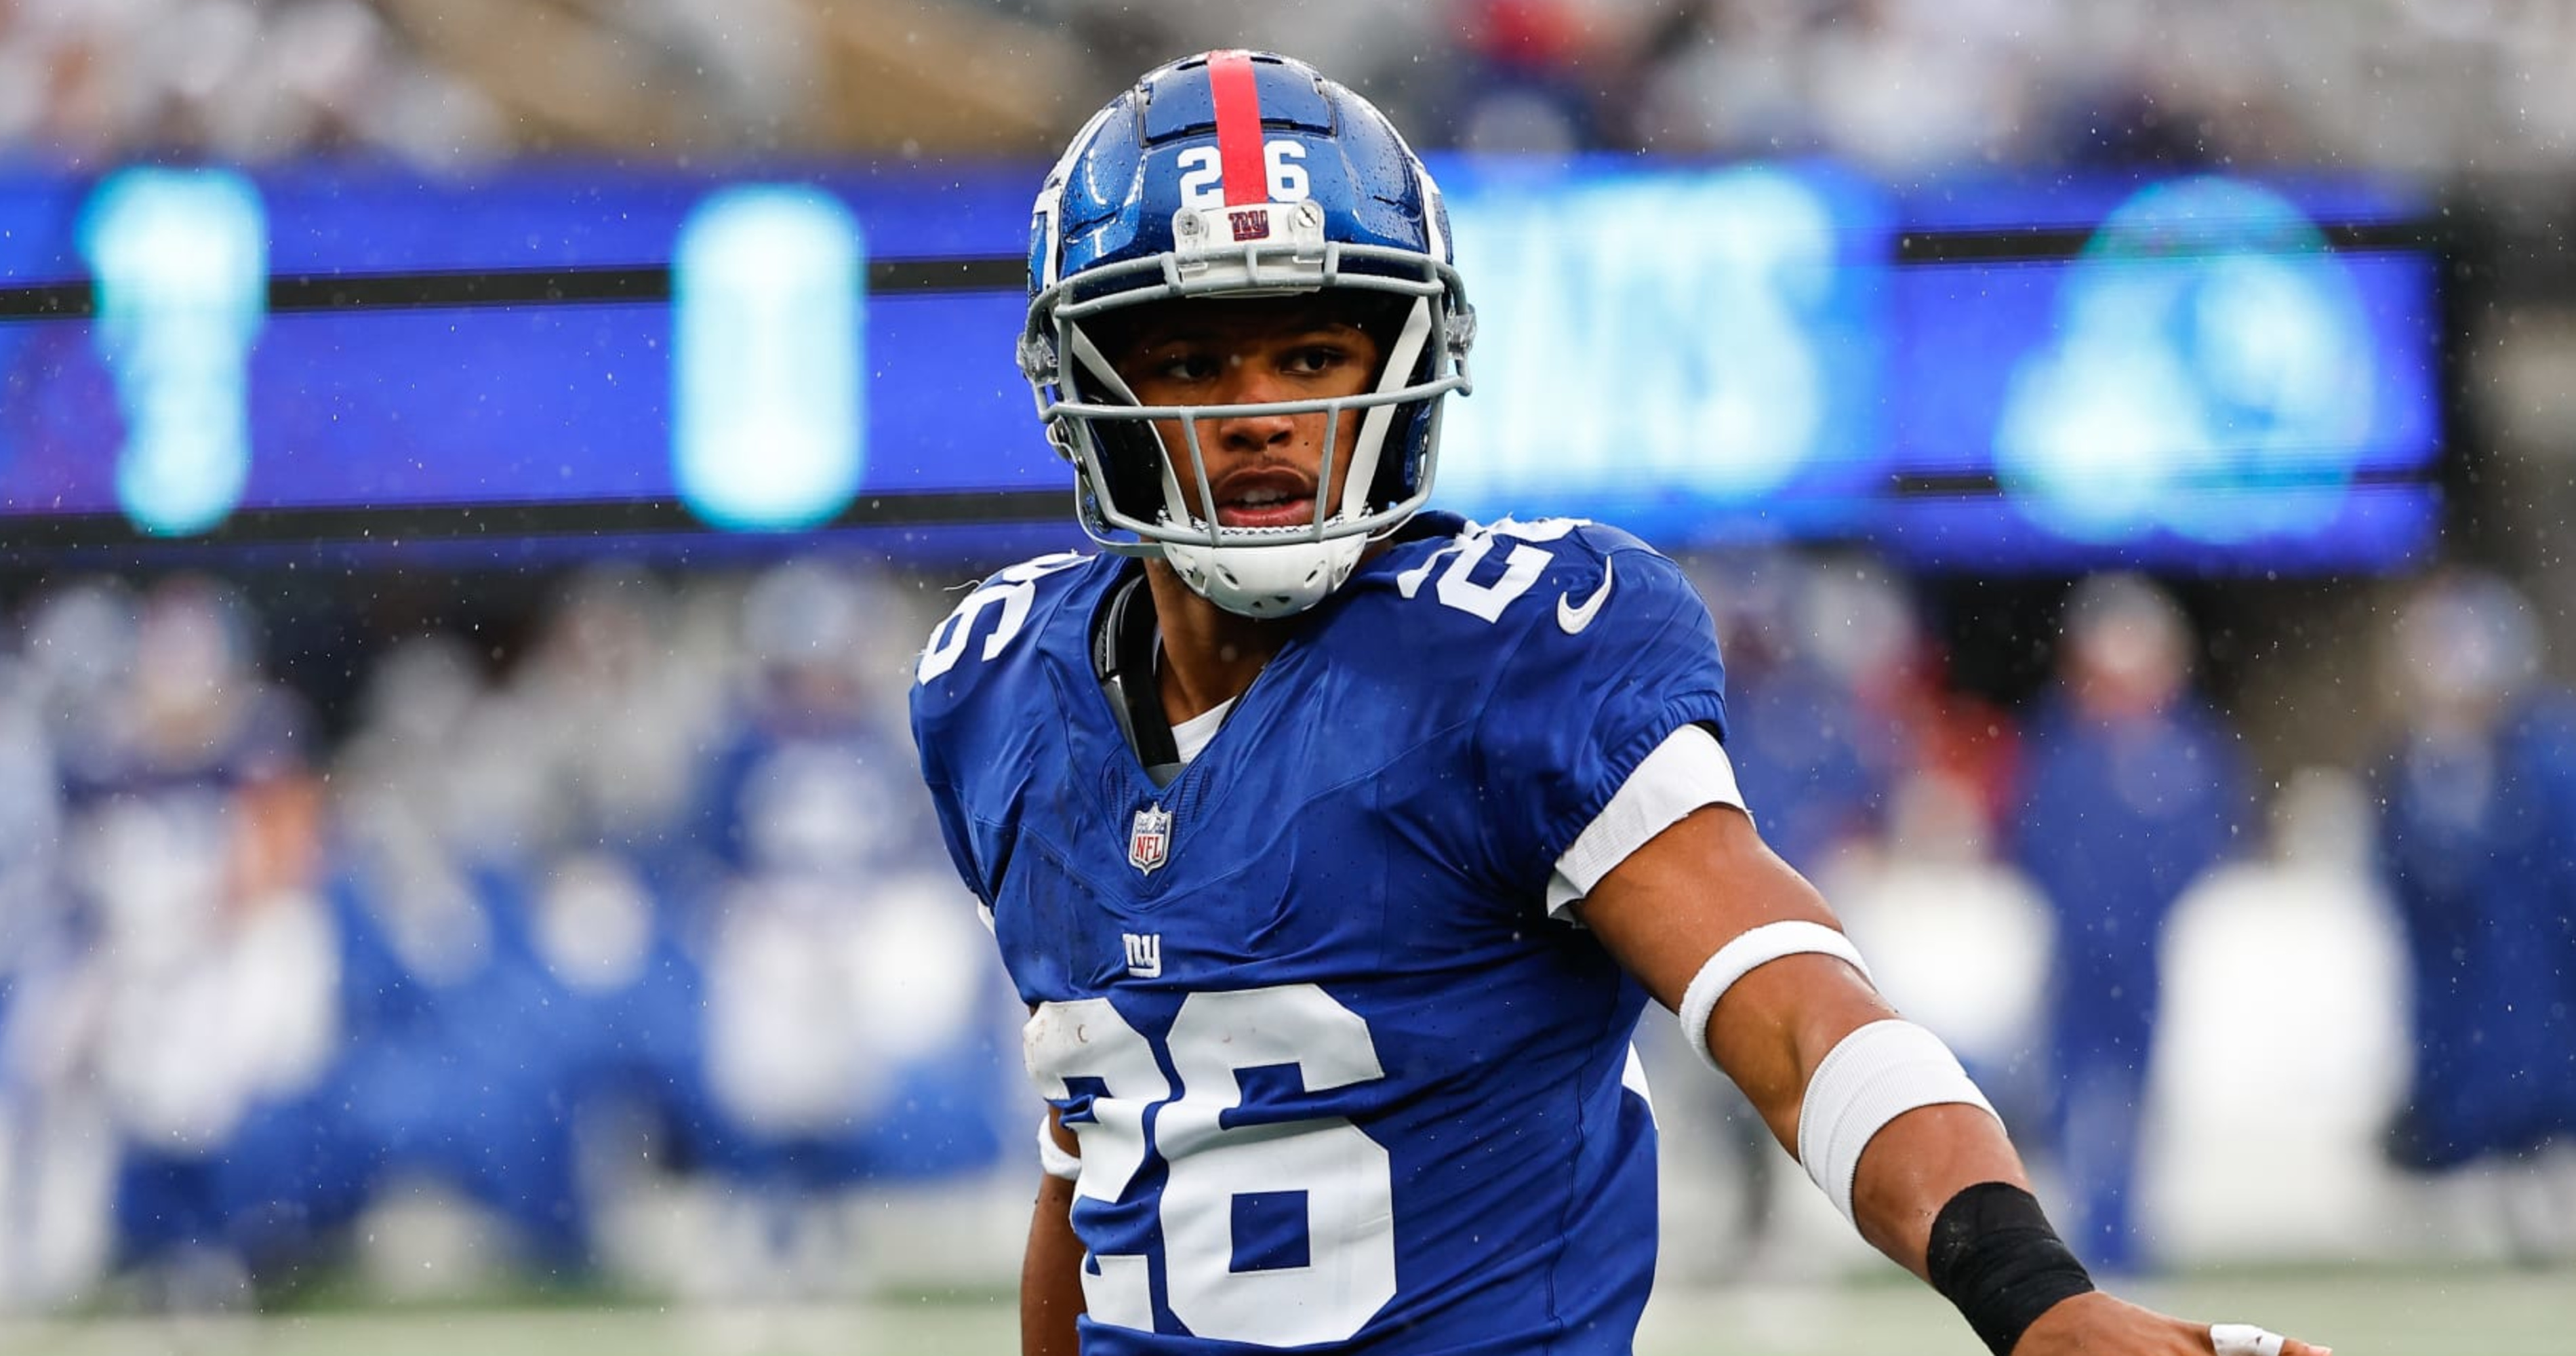 Video: Saquon Barkley's Daughter Asked If He'd 'Win Now' After Giants Exit for Eagles